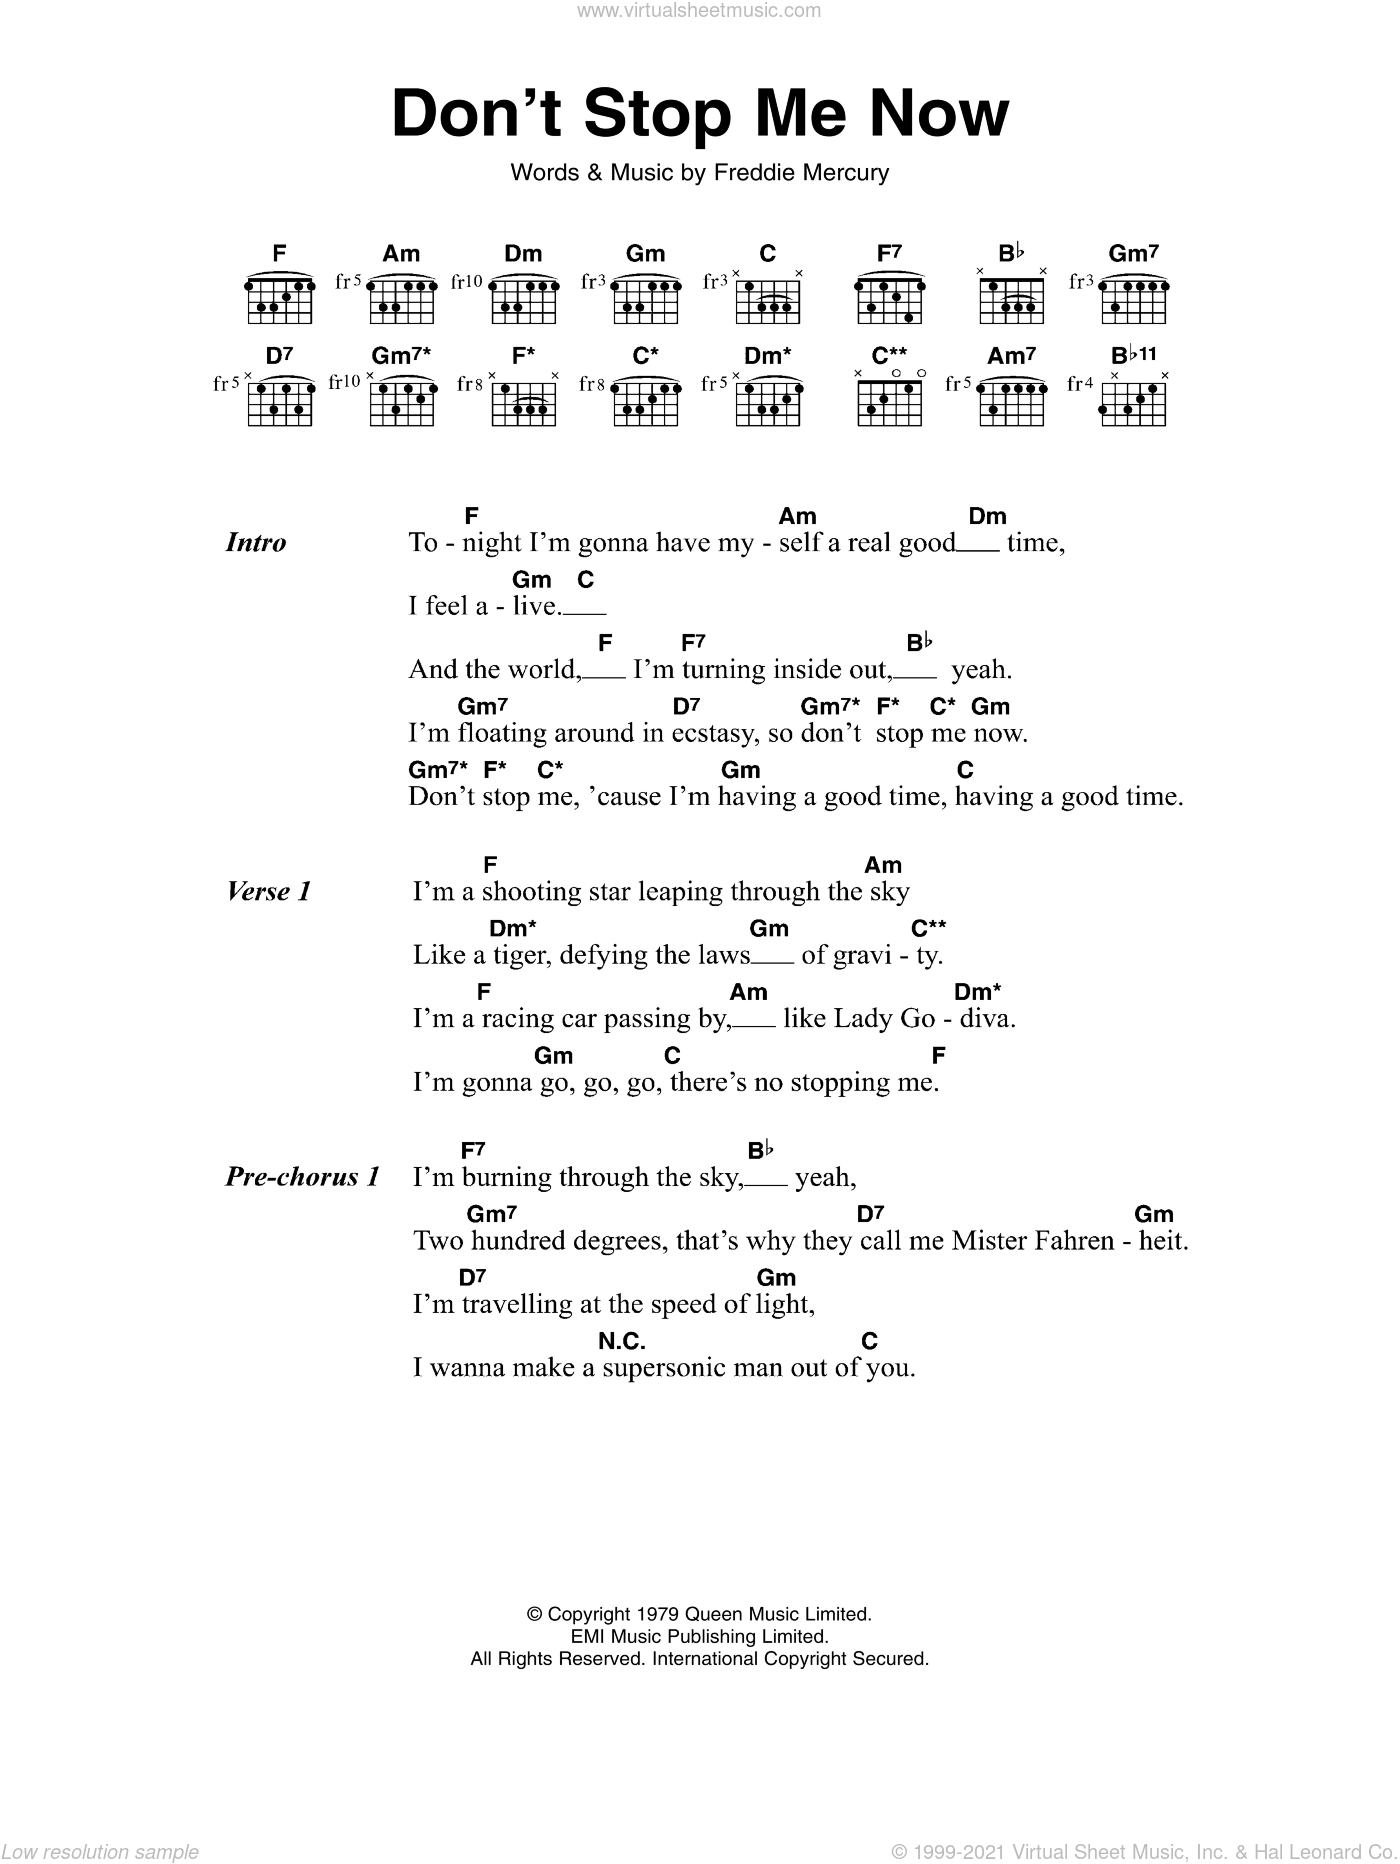 Don't Stop Me Now sheet music for guitar (chords) (v2)